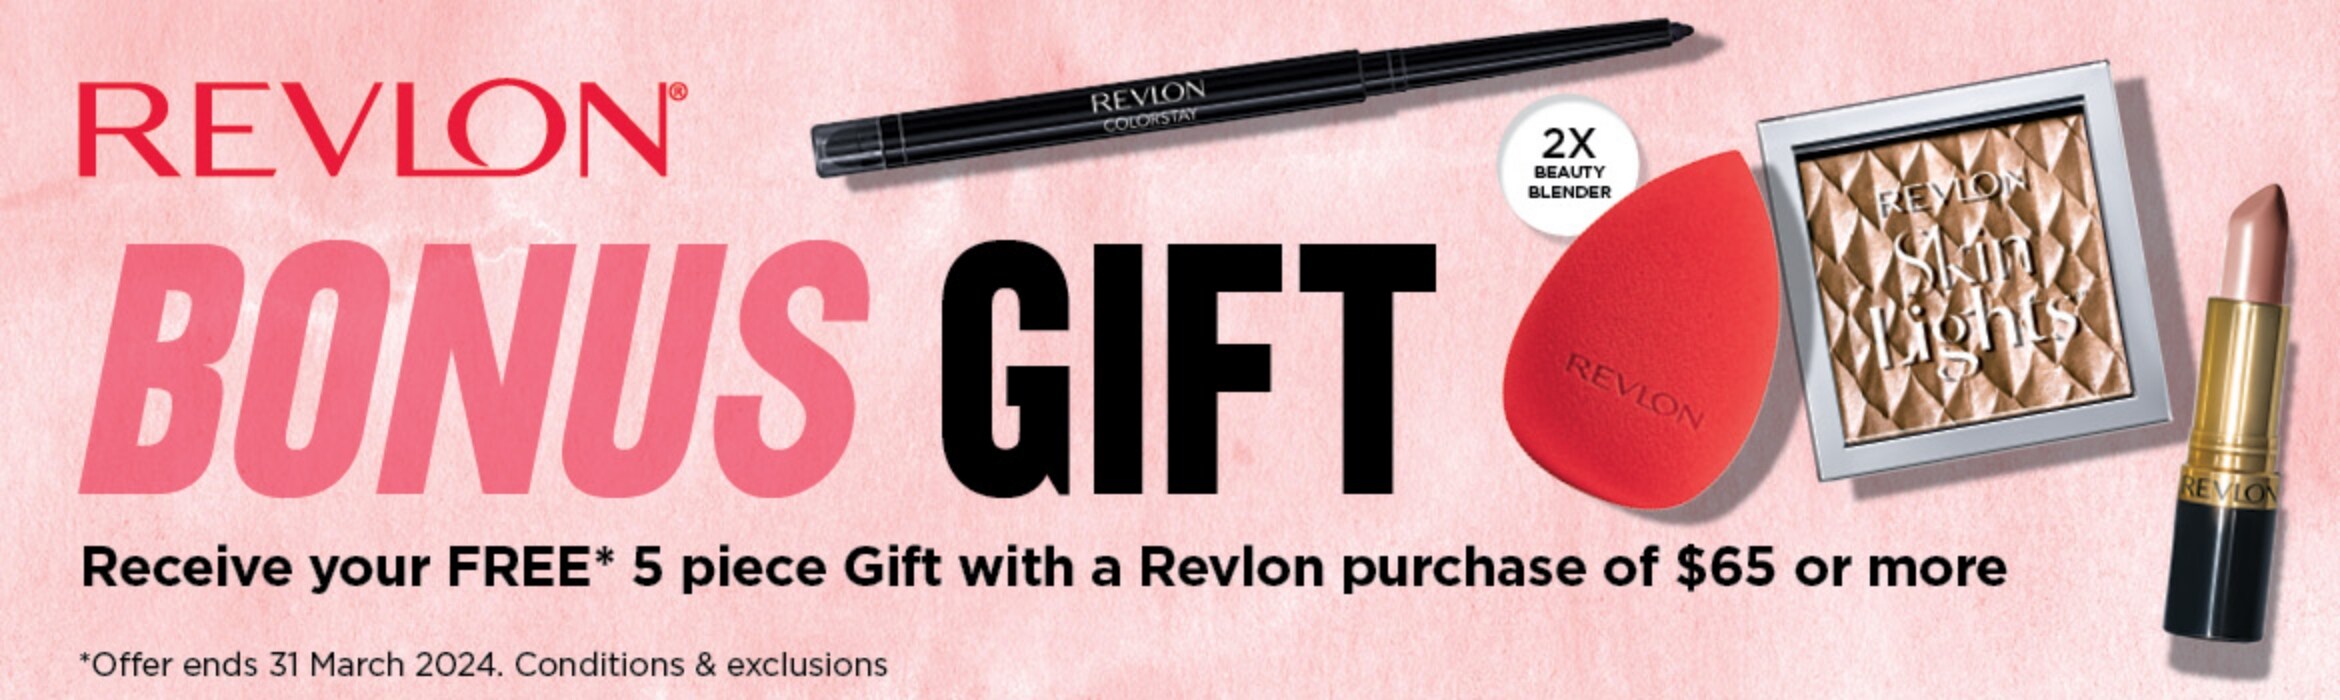 FREE GIFT Revlon 5-Piece Set with a Revlon purchase of $65 or more